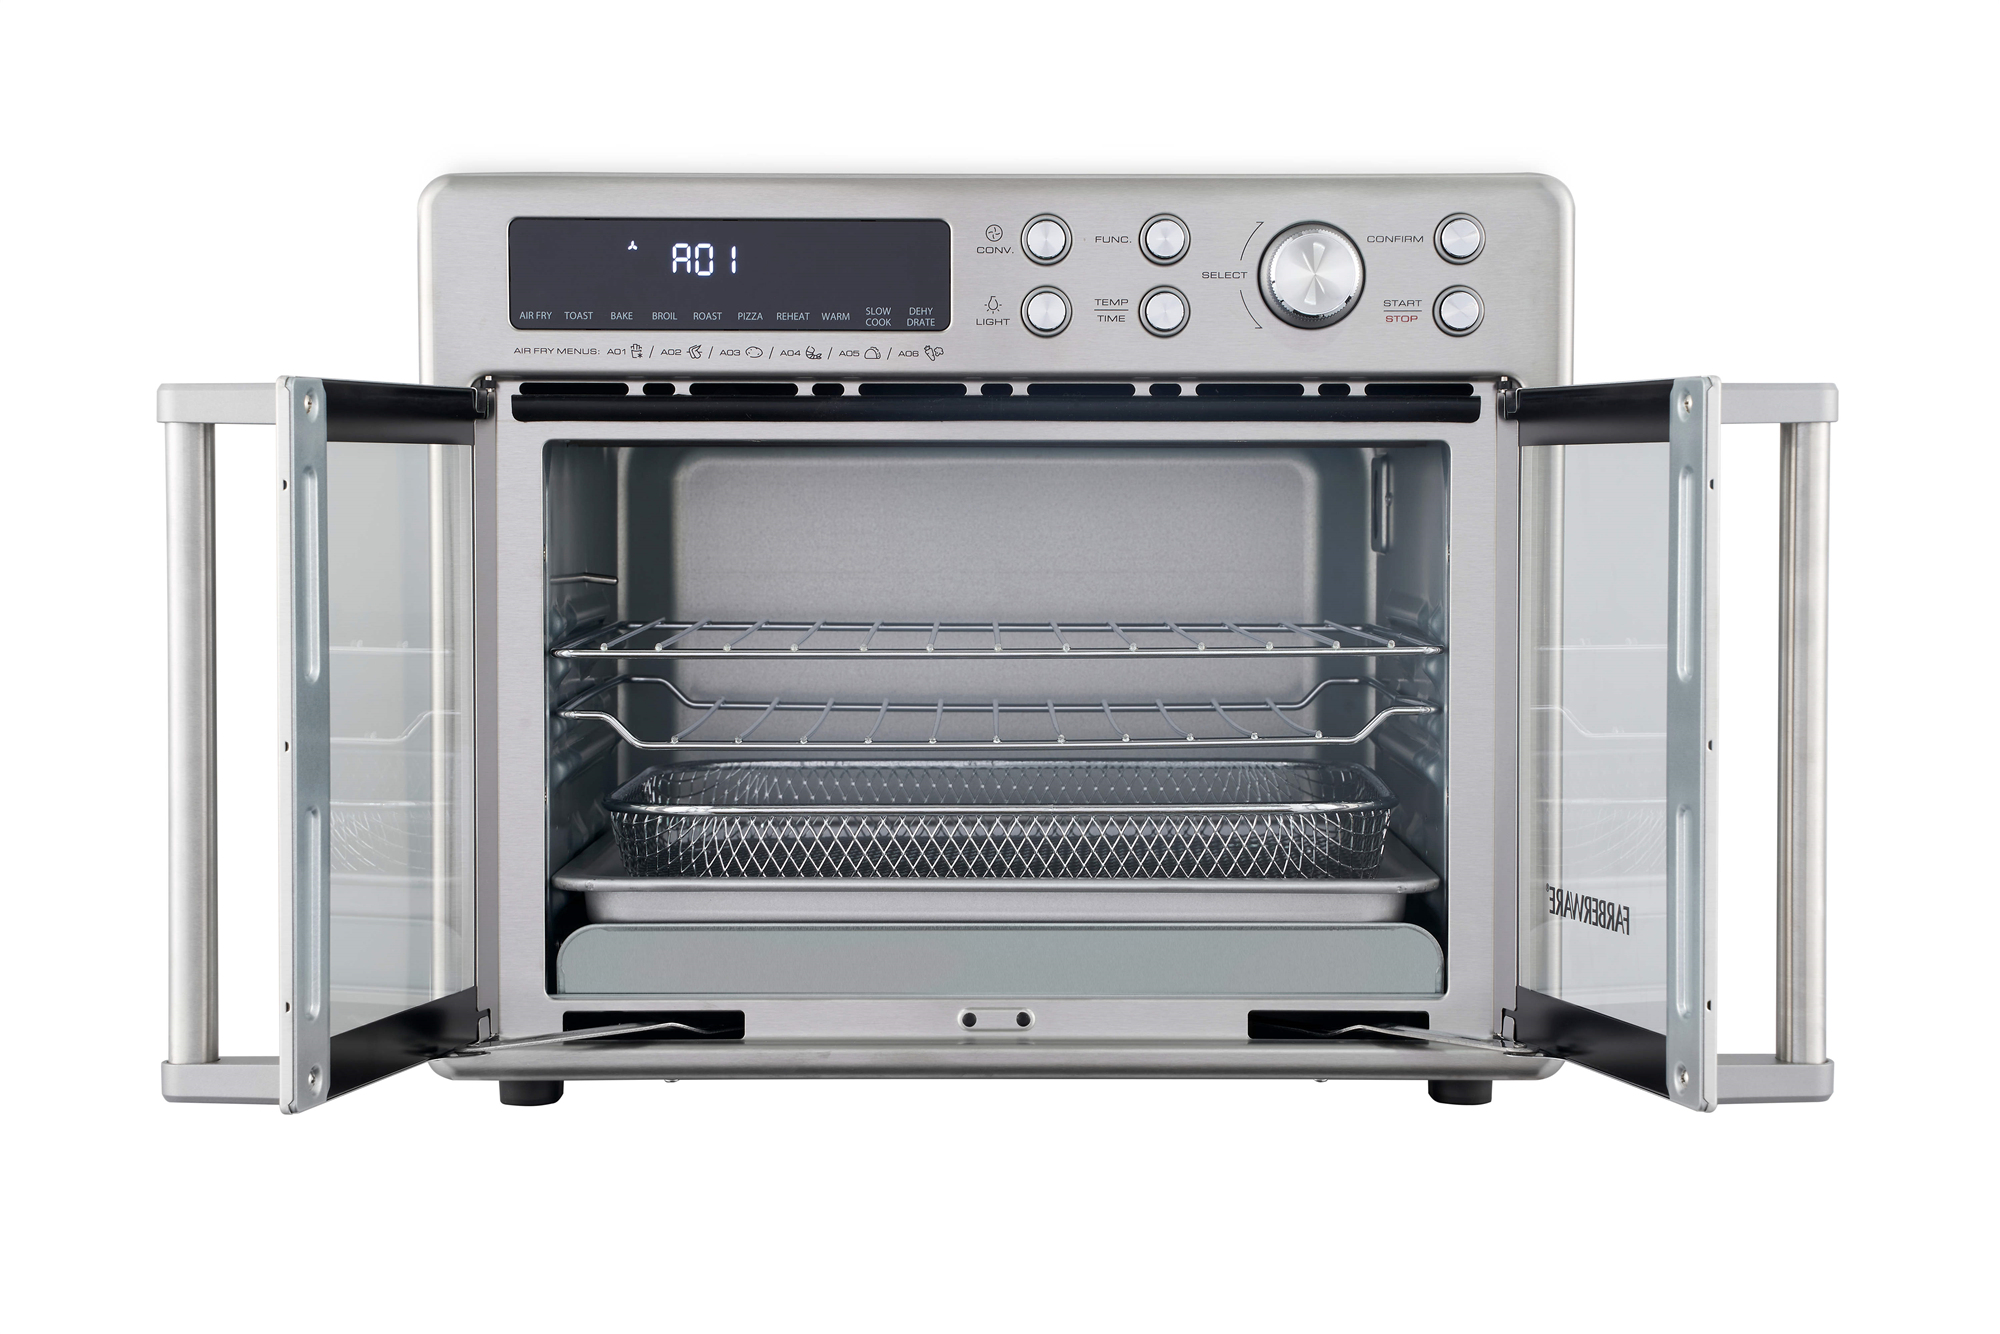 Farberware Brand 25L 6-Slice Toaster Oven with Air Fry, French Door, FW12-100024316 - image 2 of 5